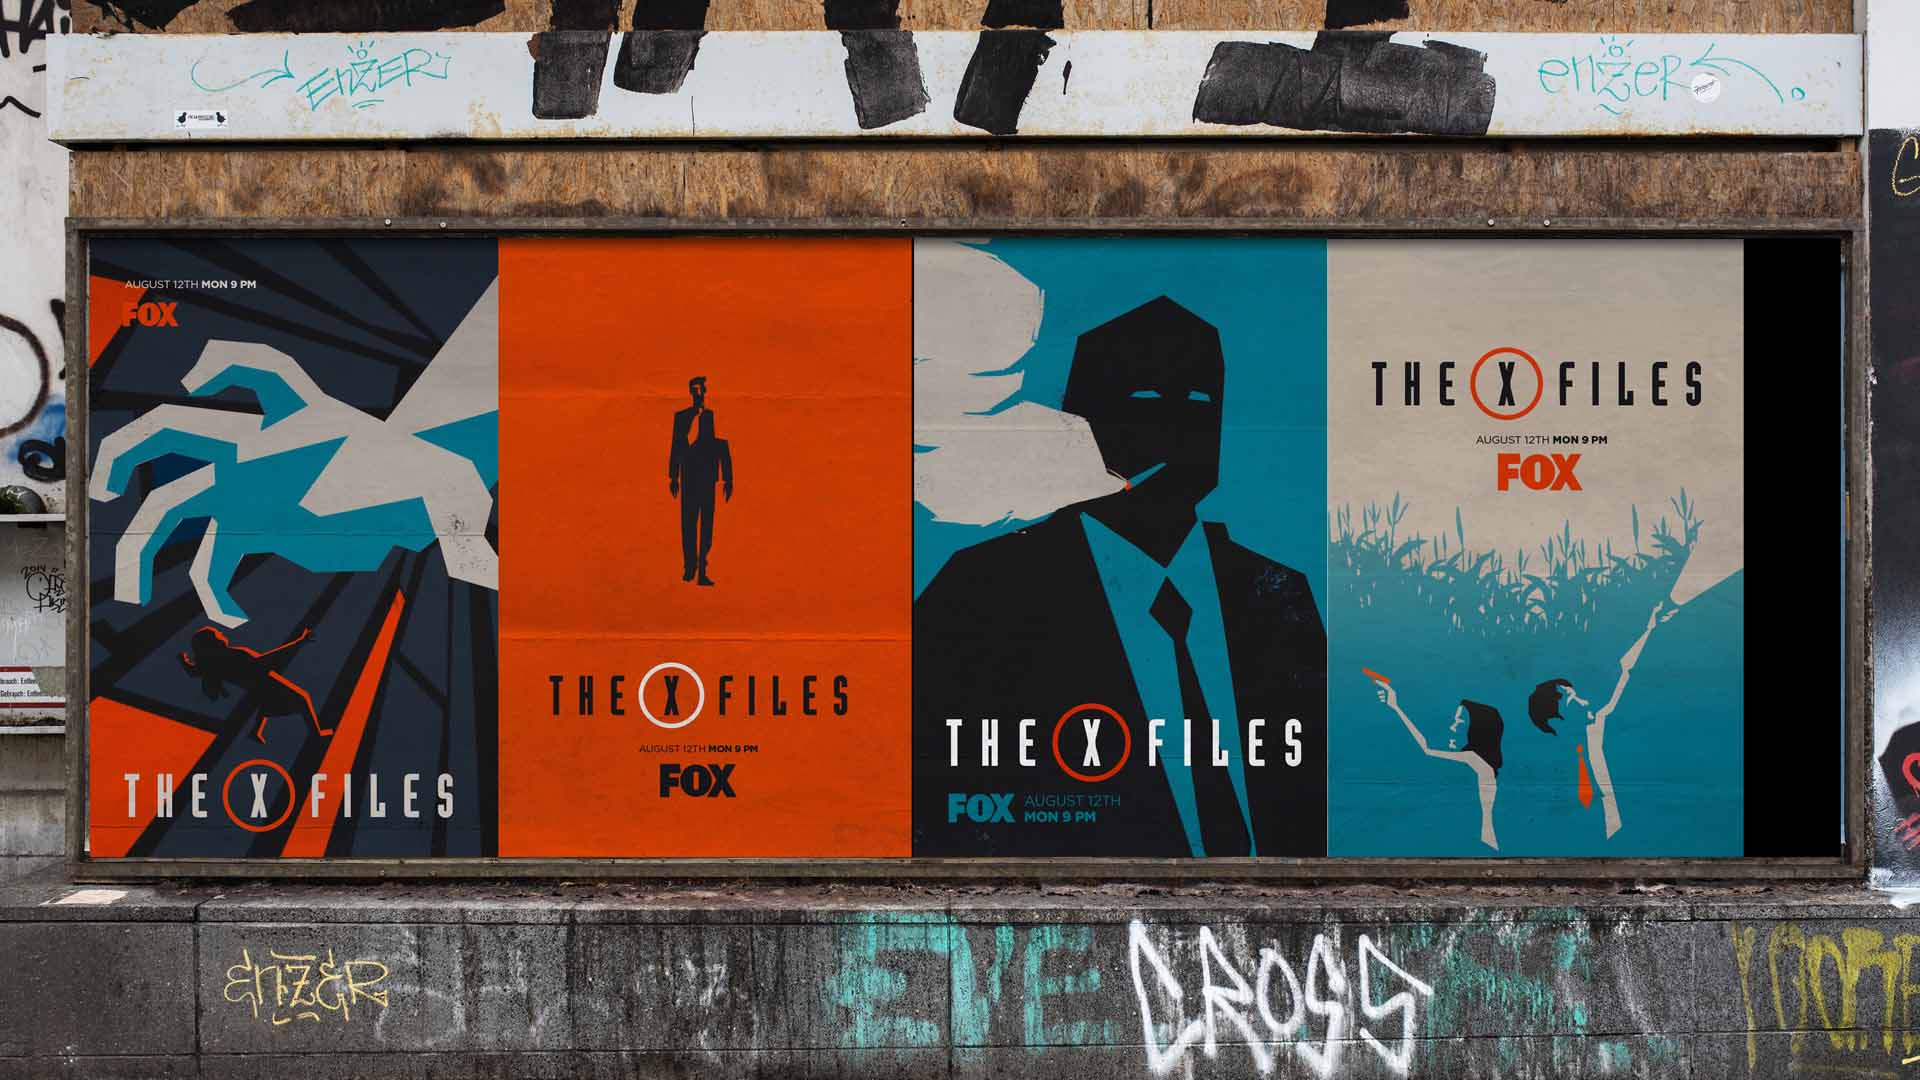 Promo for The X-Files Premiere on Fox US.